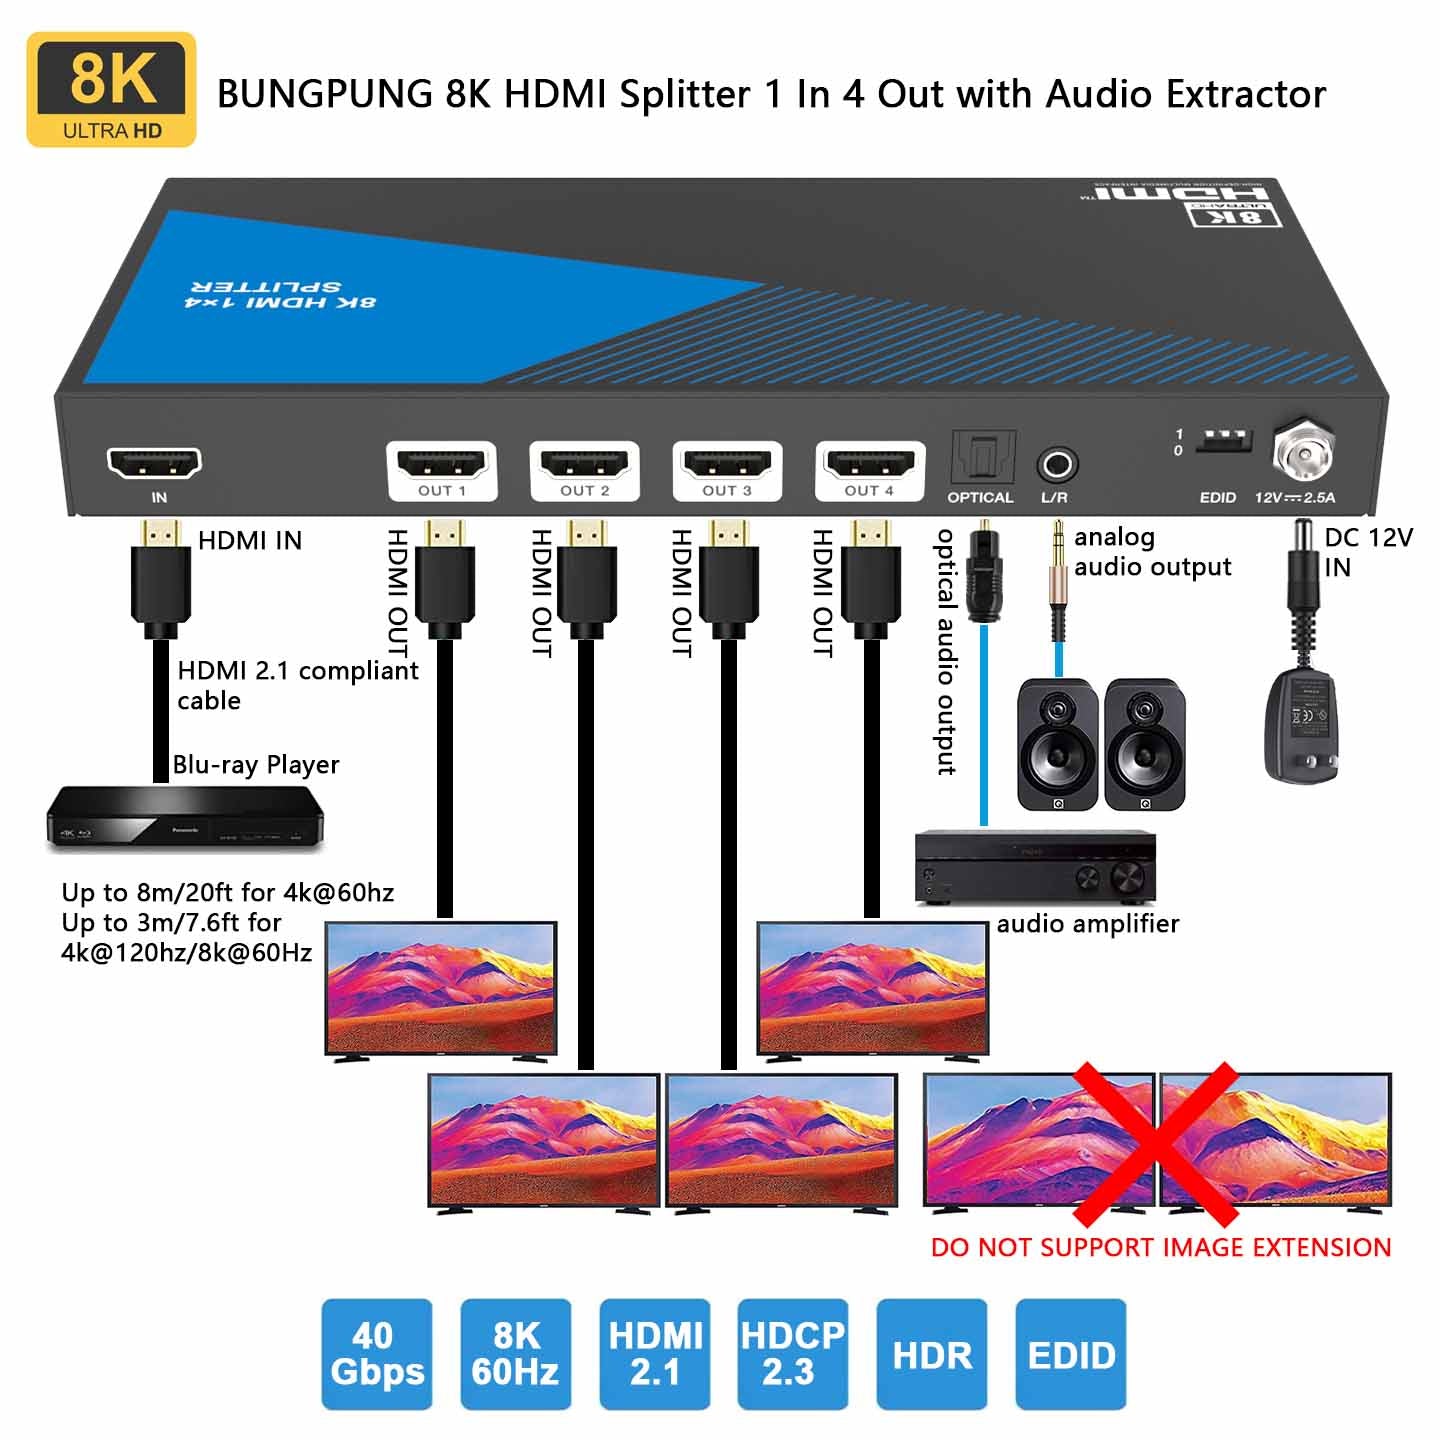 8K HDMI Splitter 1 in 4 out Audio Extractor connection